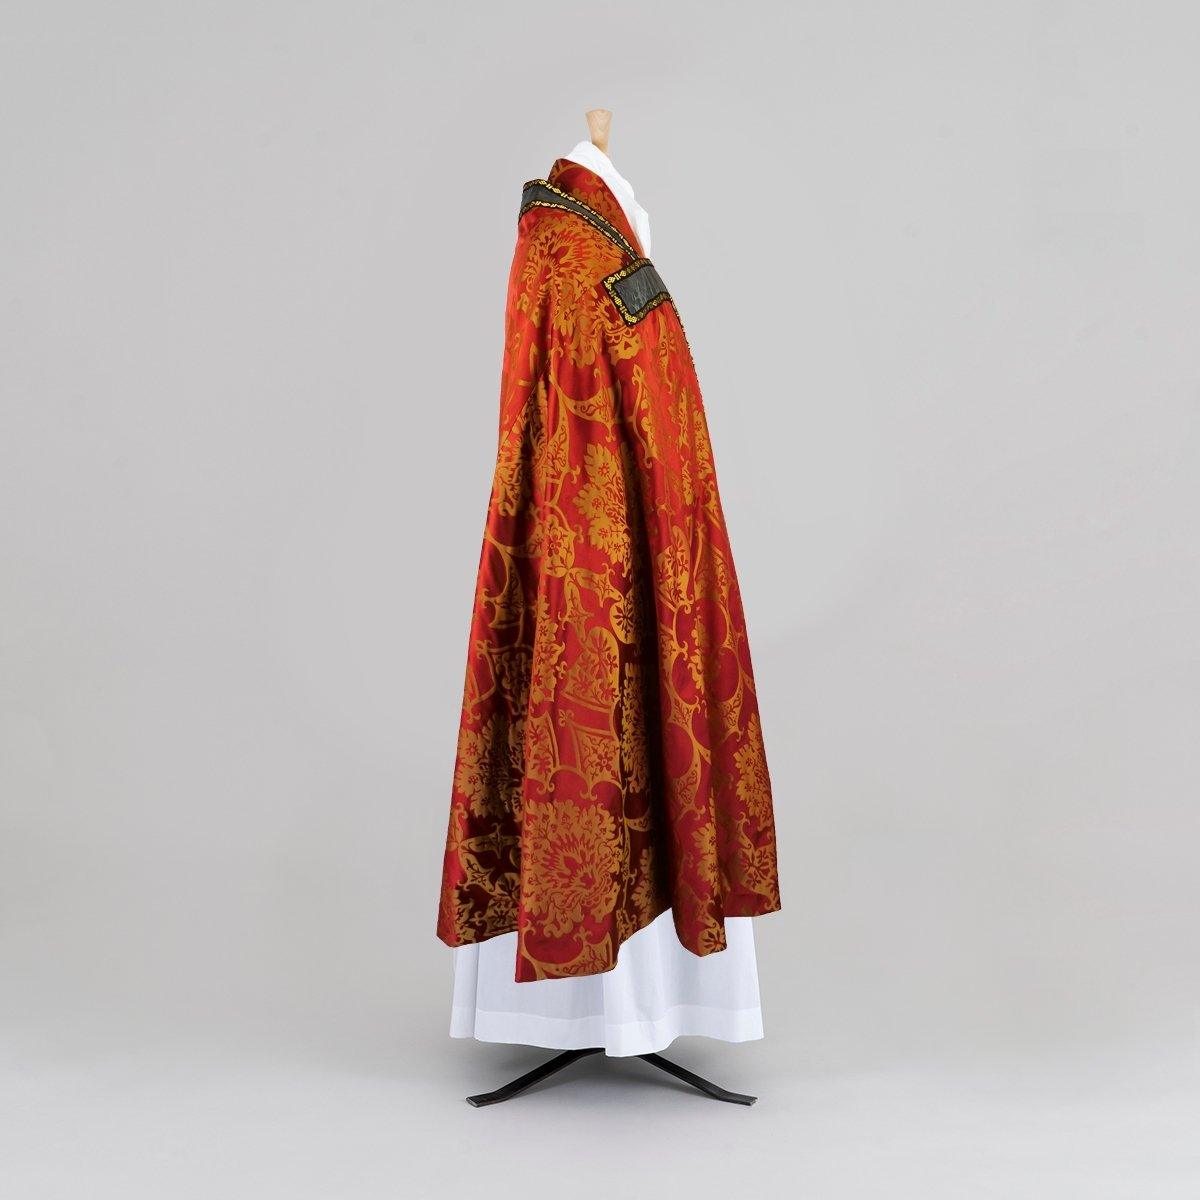 Conical Chasuble & Stole in Sarum Red/Gold 'Gothic' Silk with Sarum Indigo 'Holbein' Orphreys - Watts & Co.